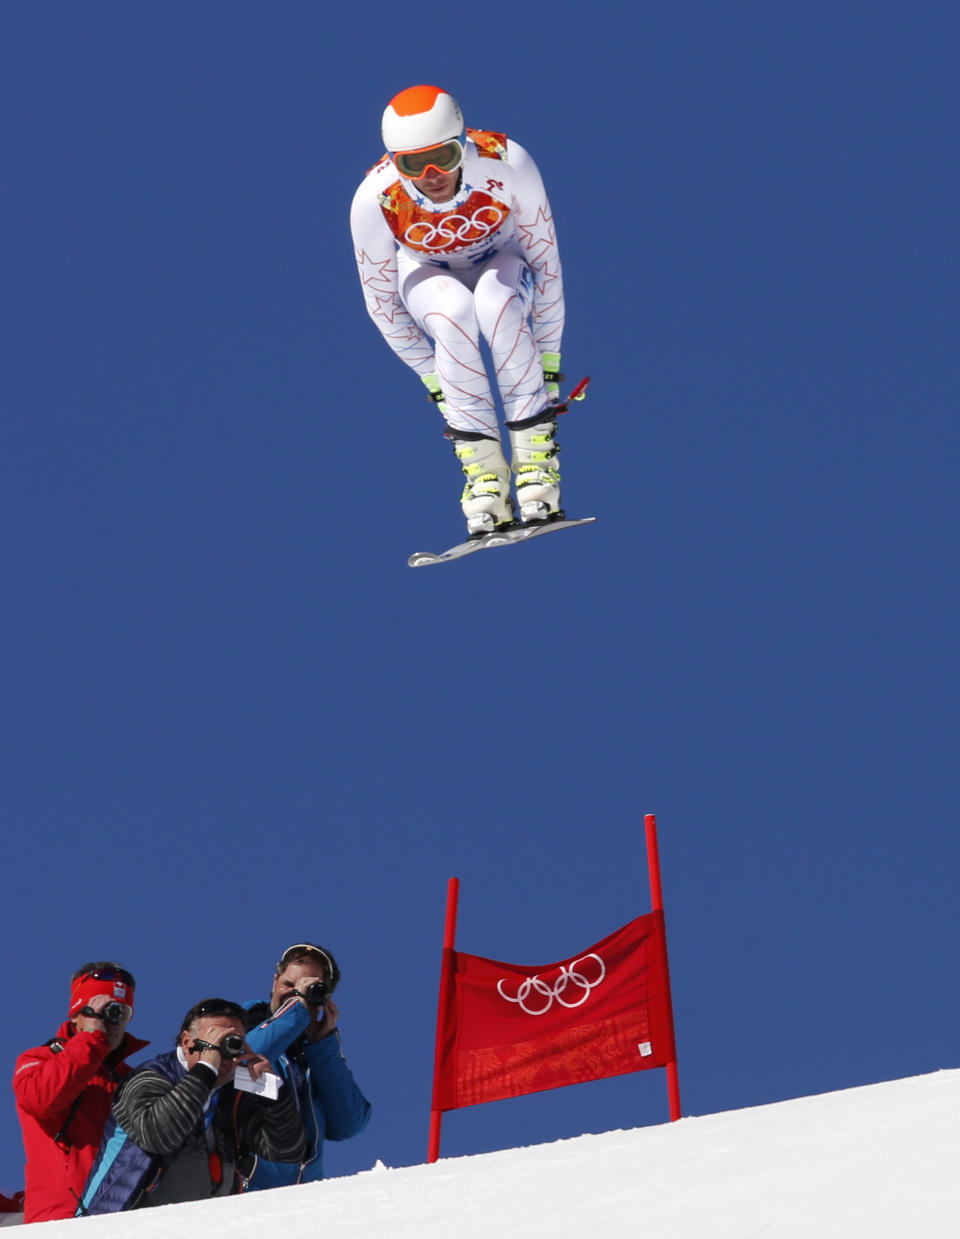 United States' Bode Miller makes a jump during a men's downhill training run for the Sochi 2014 Winter Olympics, Saturday, Feb. 8, 2014, in Krasnaya Polyana, Russia. (AP Photo)